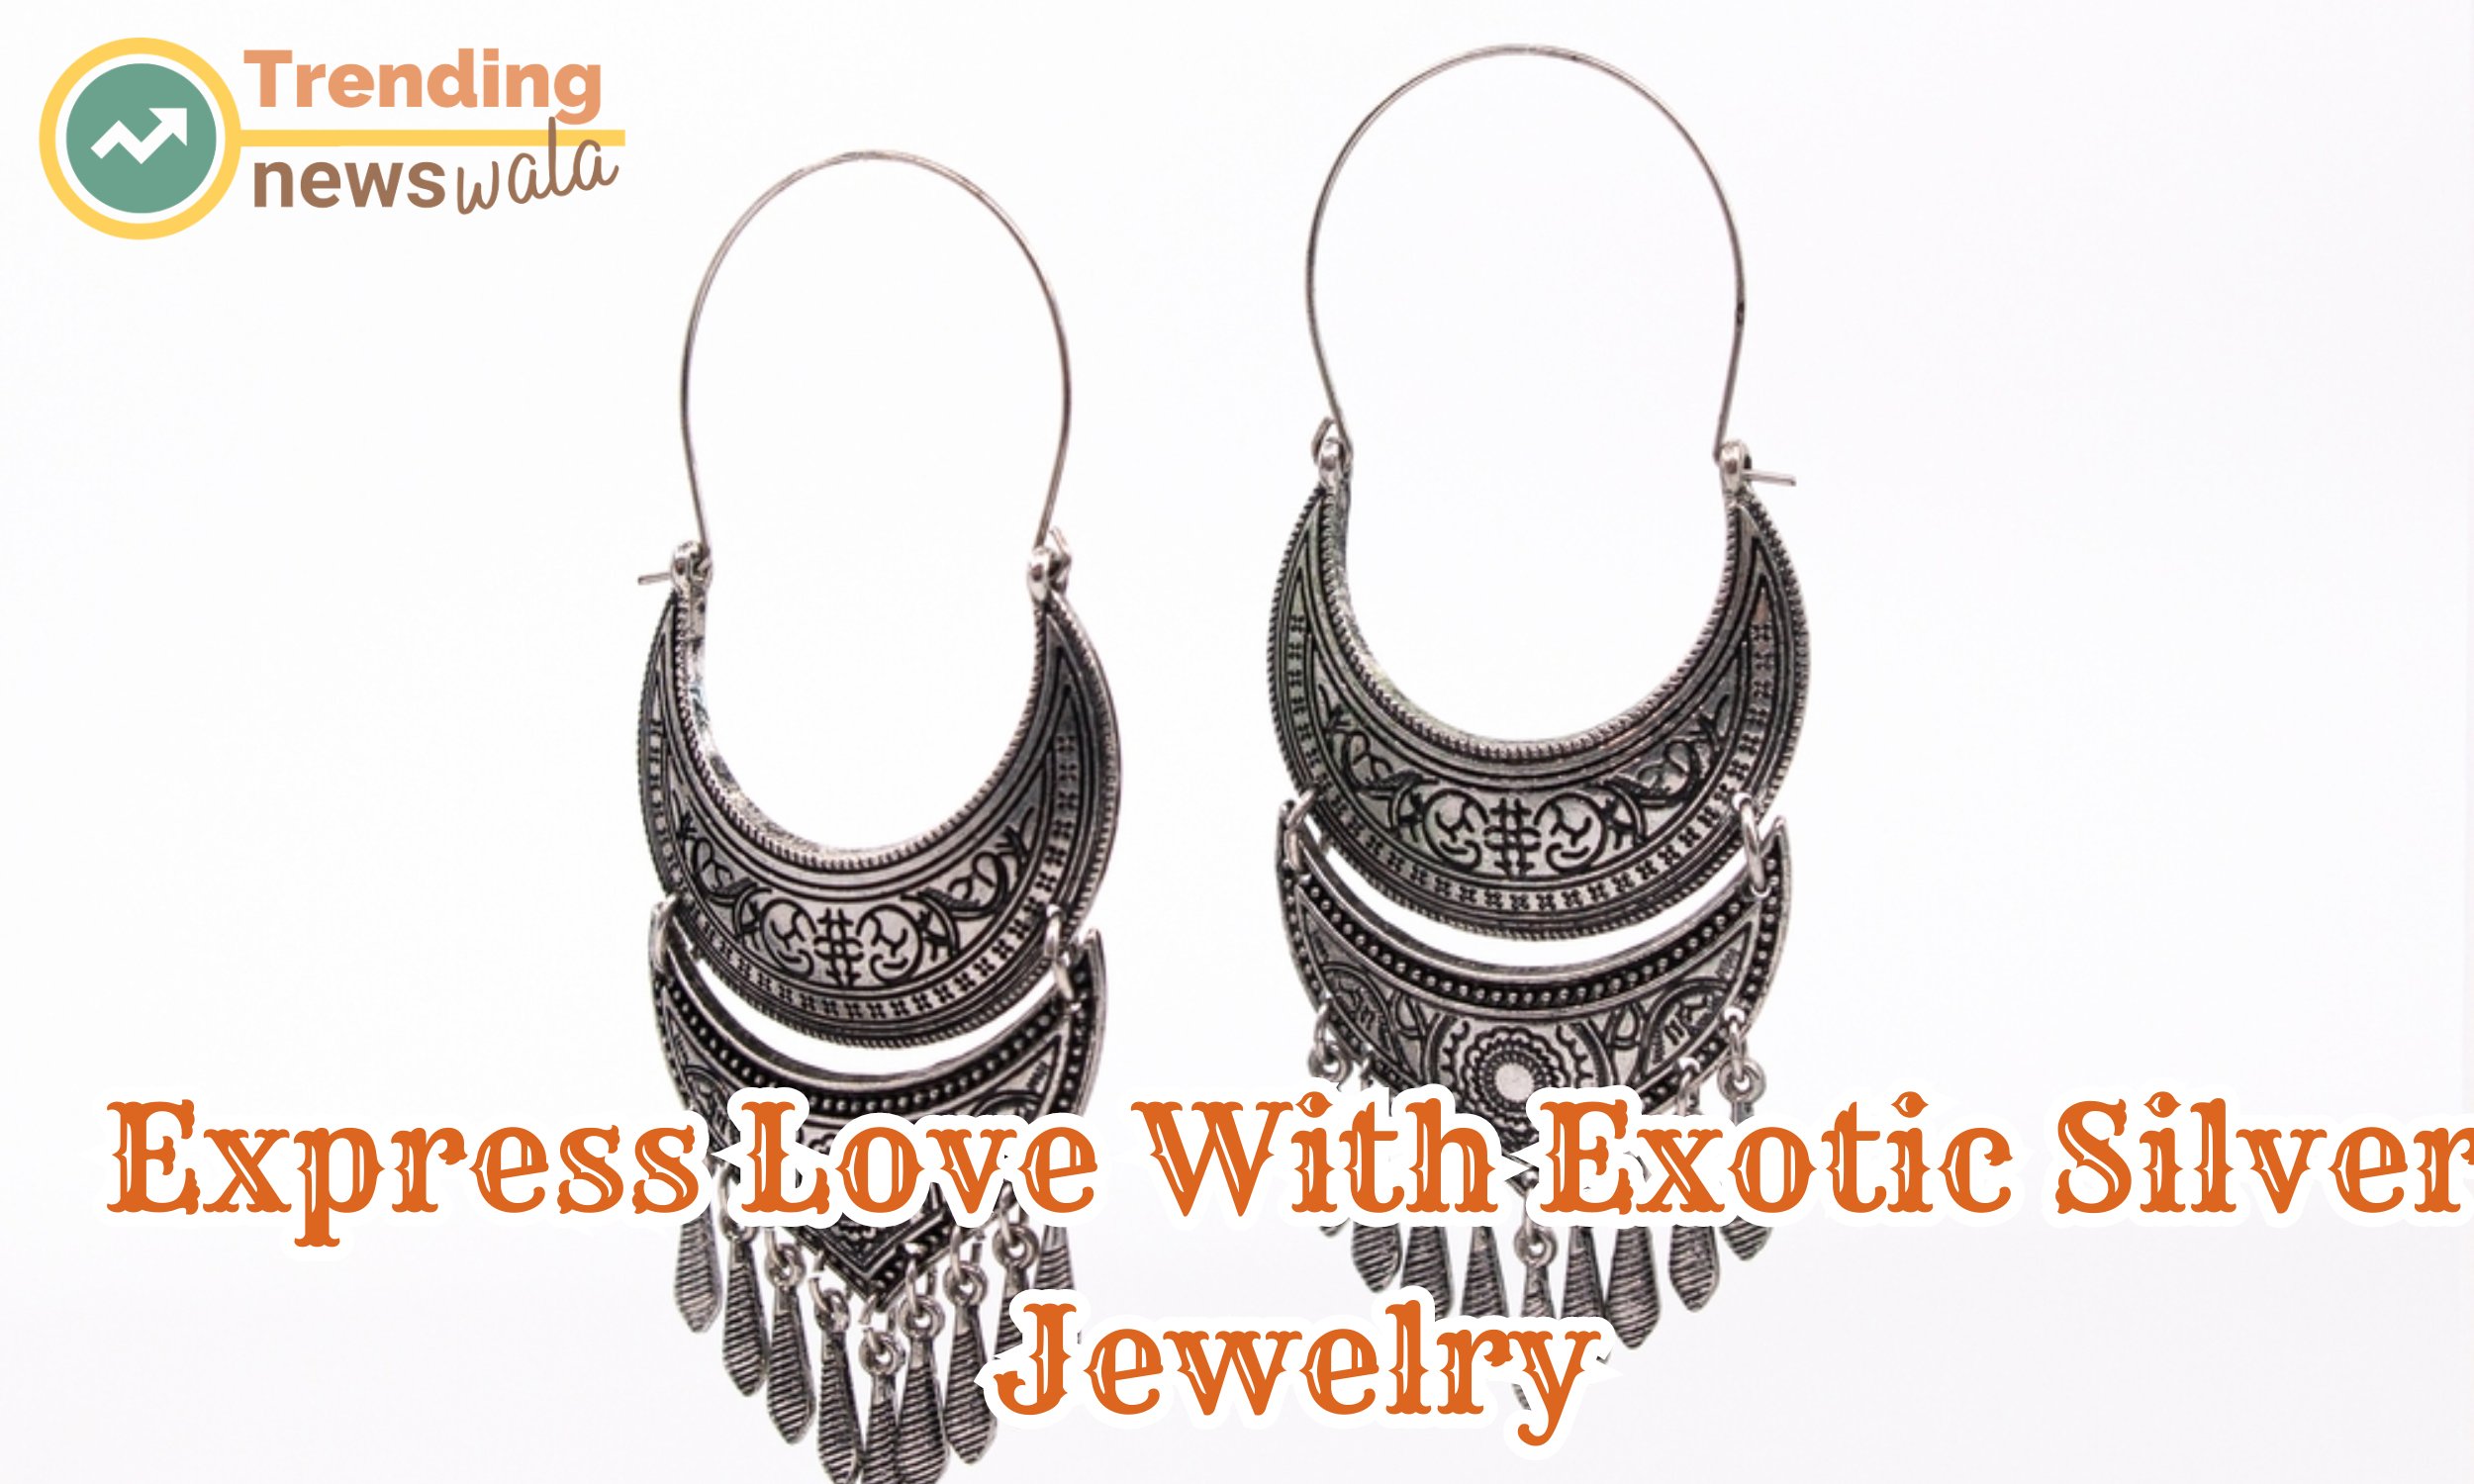 Expressing love with exotic silver jewelry involves selecting pieces